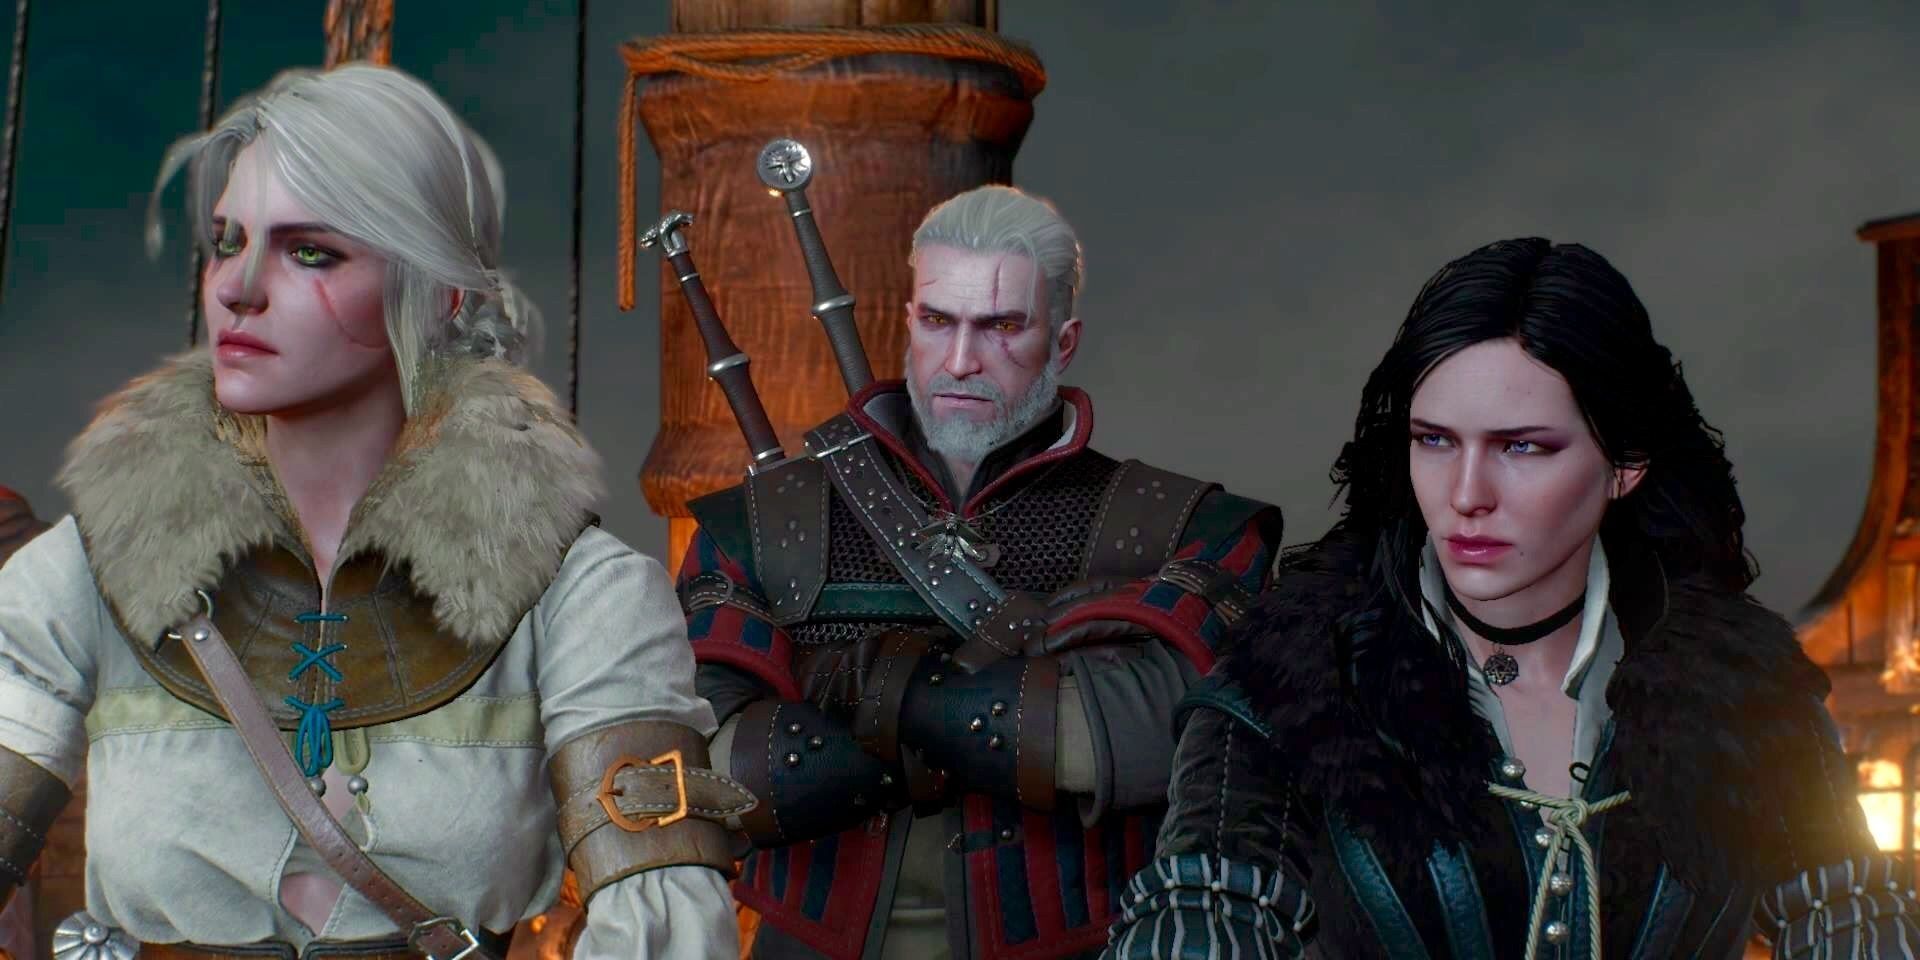 From left to right, Ciri, Geralt, and Yennefer all stand looking at something off-screen